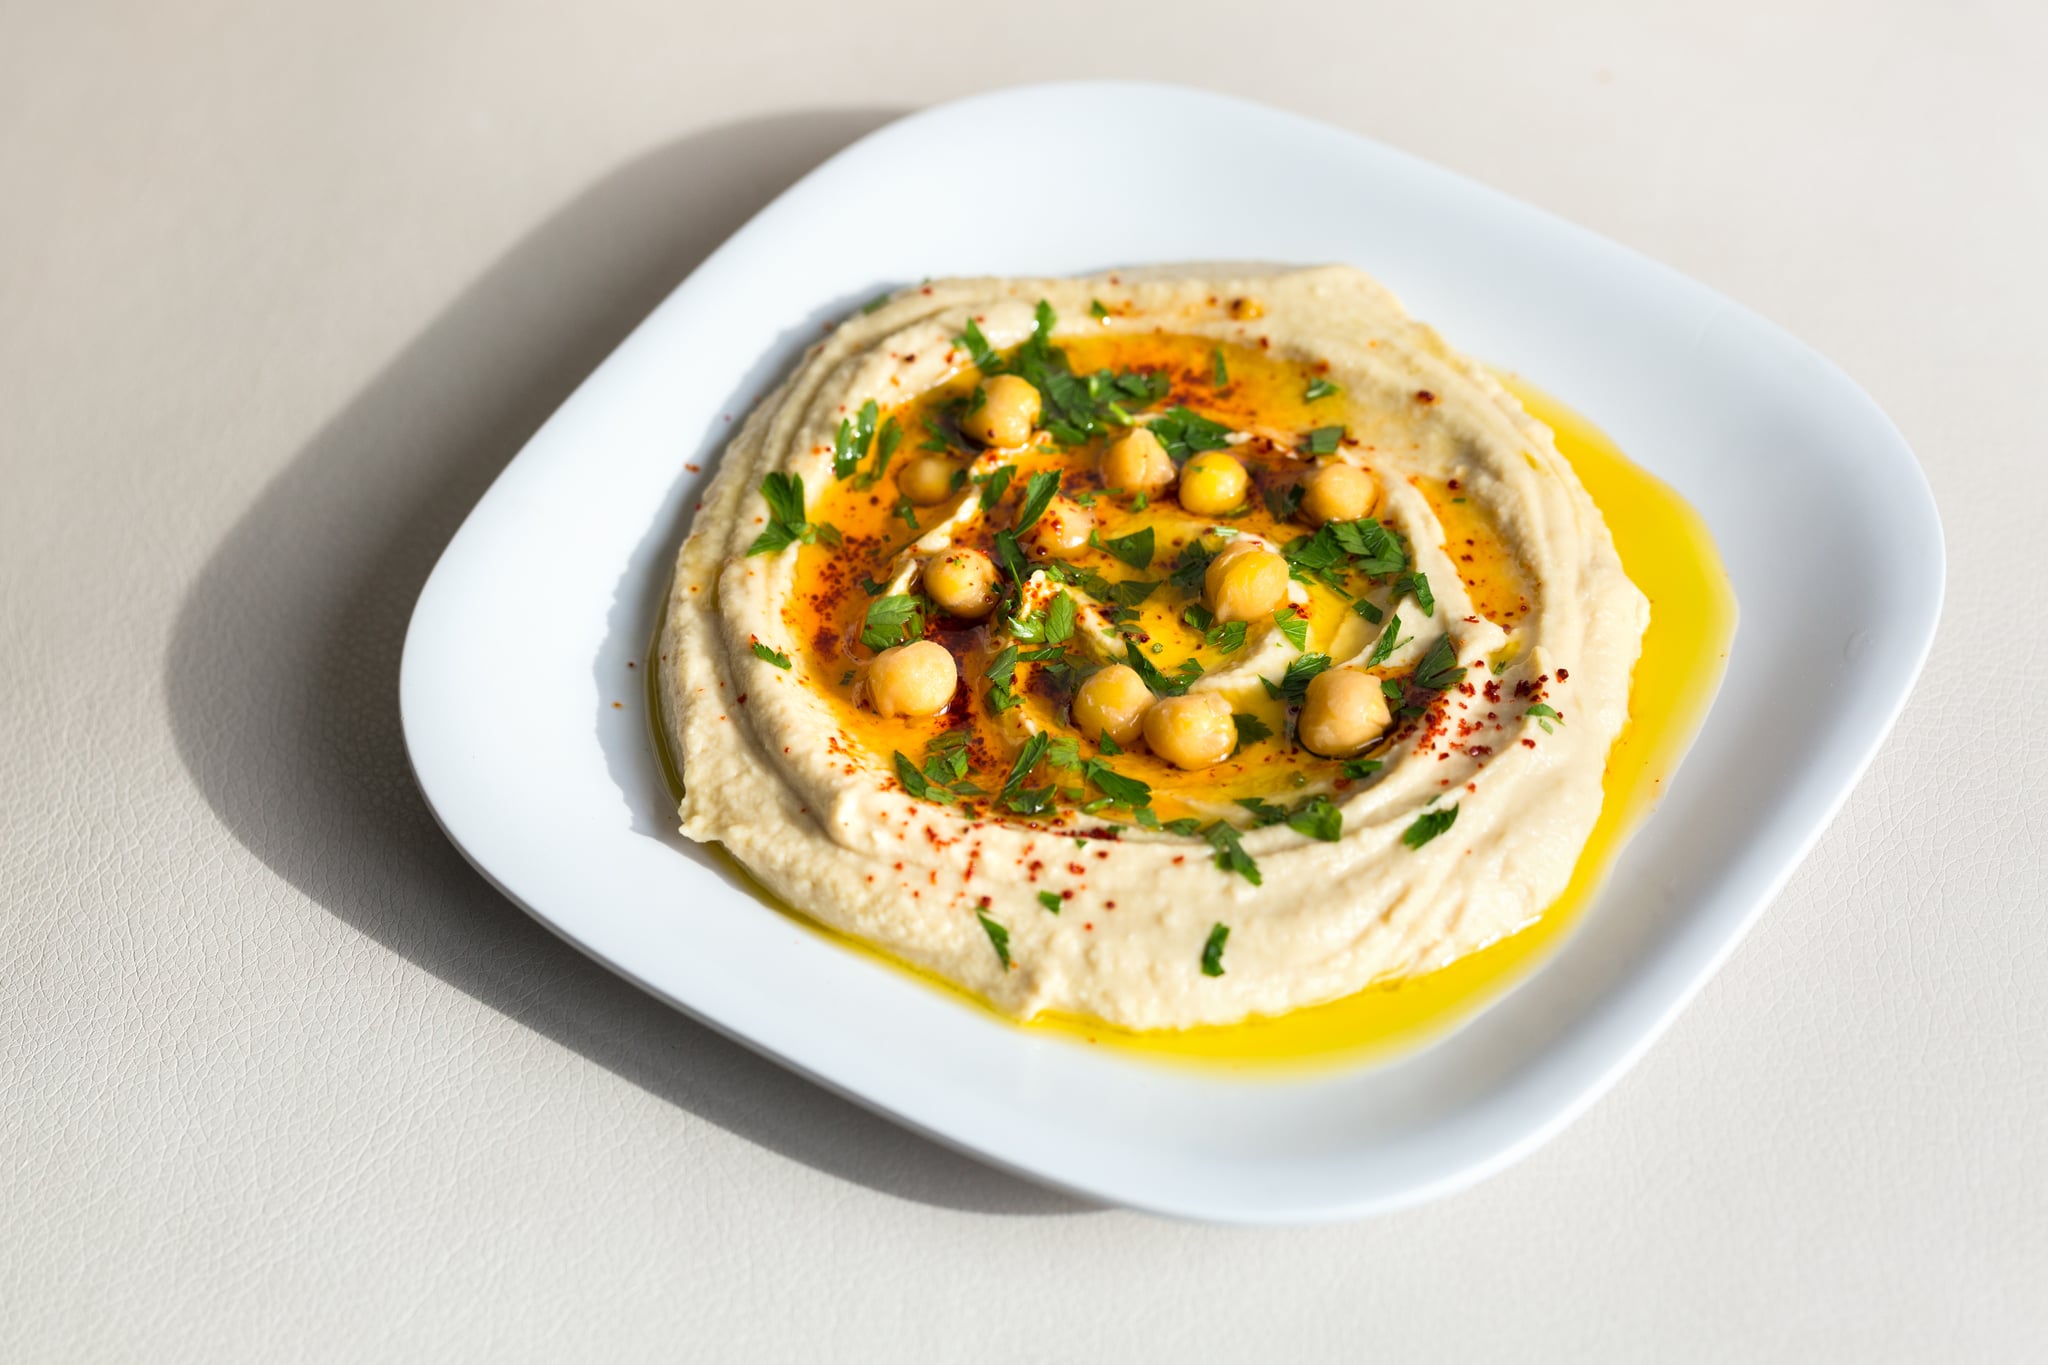 Homemade hummus -  chickpea spread with tahini - on white background; is hummus good for you?